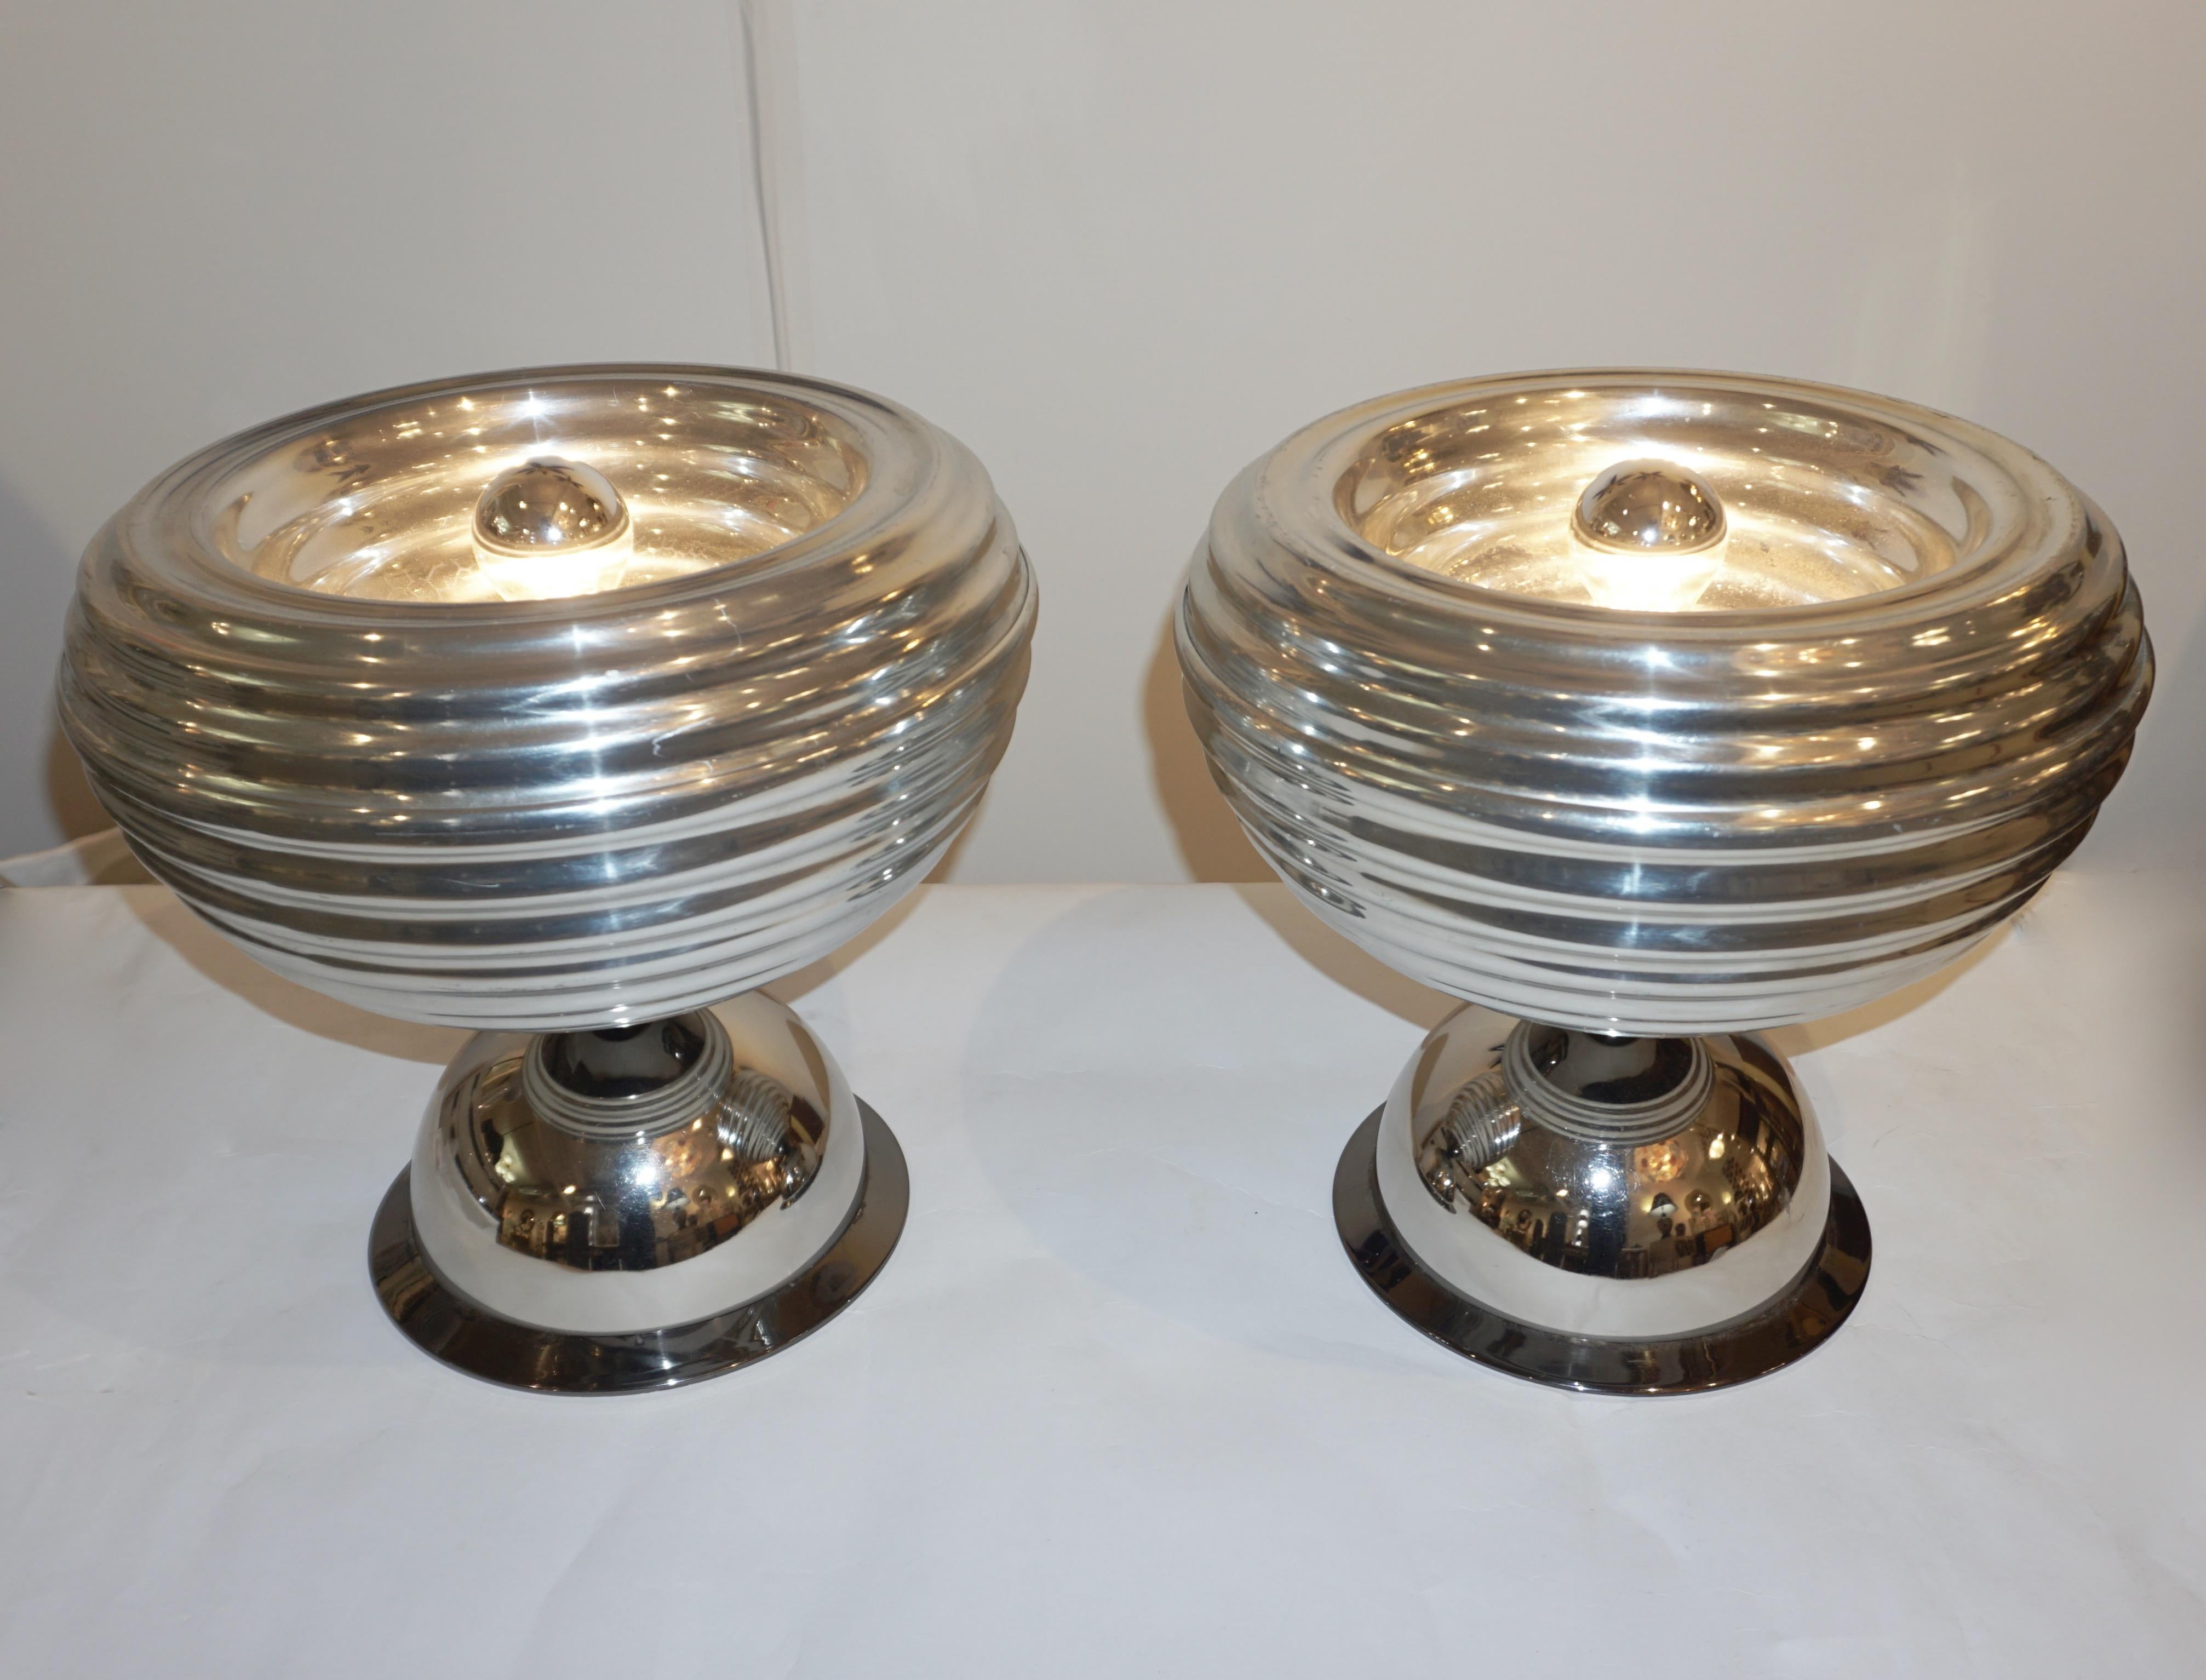 1960s rare organic pair of table lamps designed by Achille & Pier Giacomo Castiglioni for Flos, one still with manufacturer's label, in polished aluminum with a reflective shiny finish. The nicely spun bodies are raised on half round bases finished